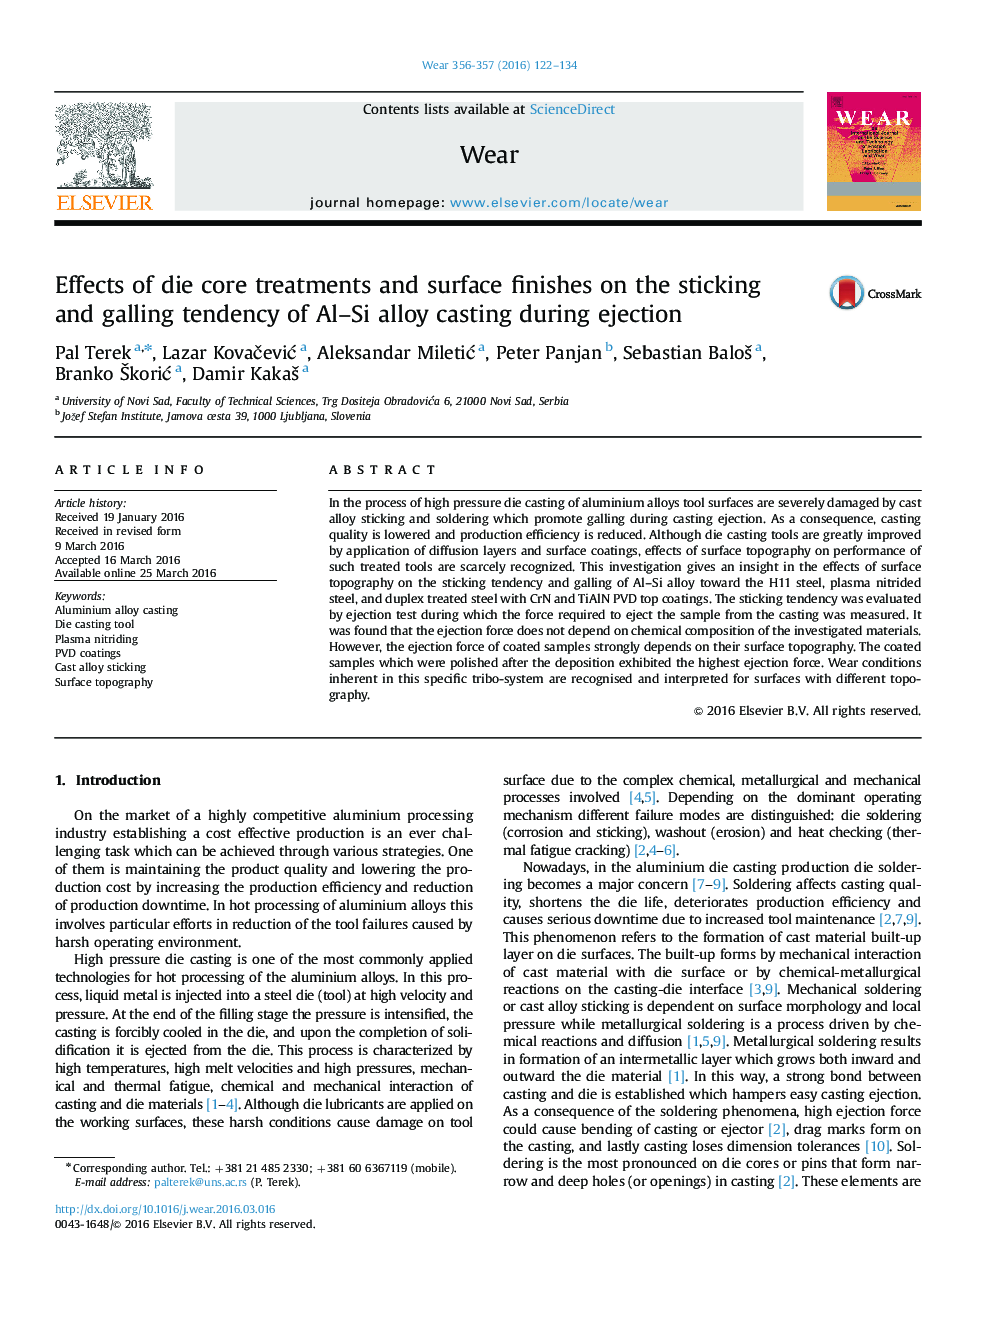 Effects of die core treatments and surface finishes on the sticking and galling tendency of Al-Si alloy casting during ejection